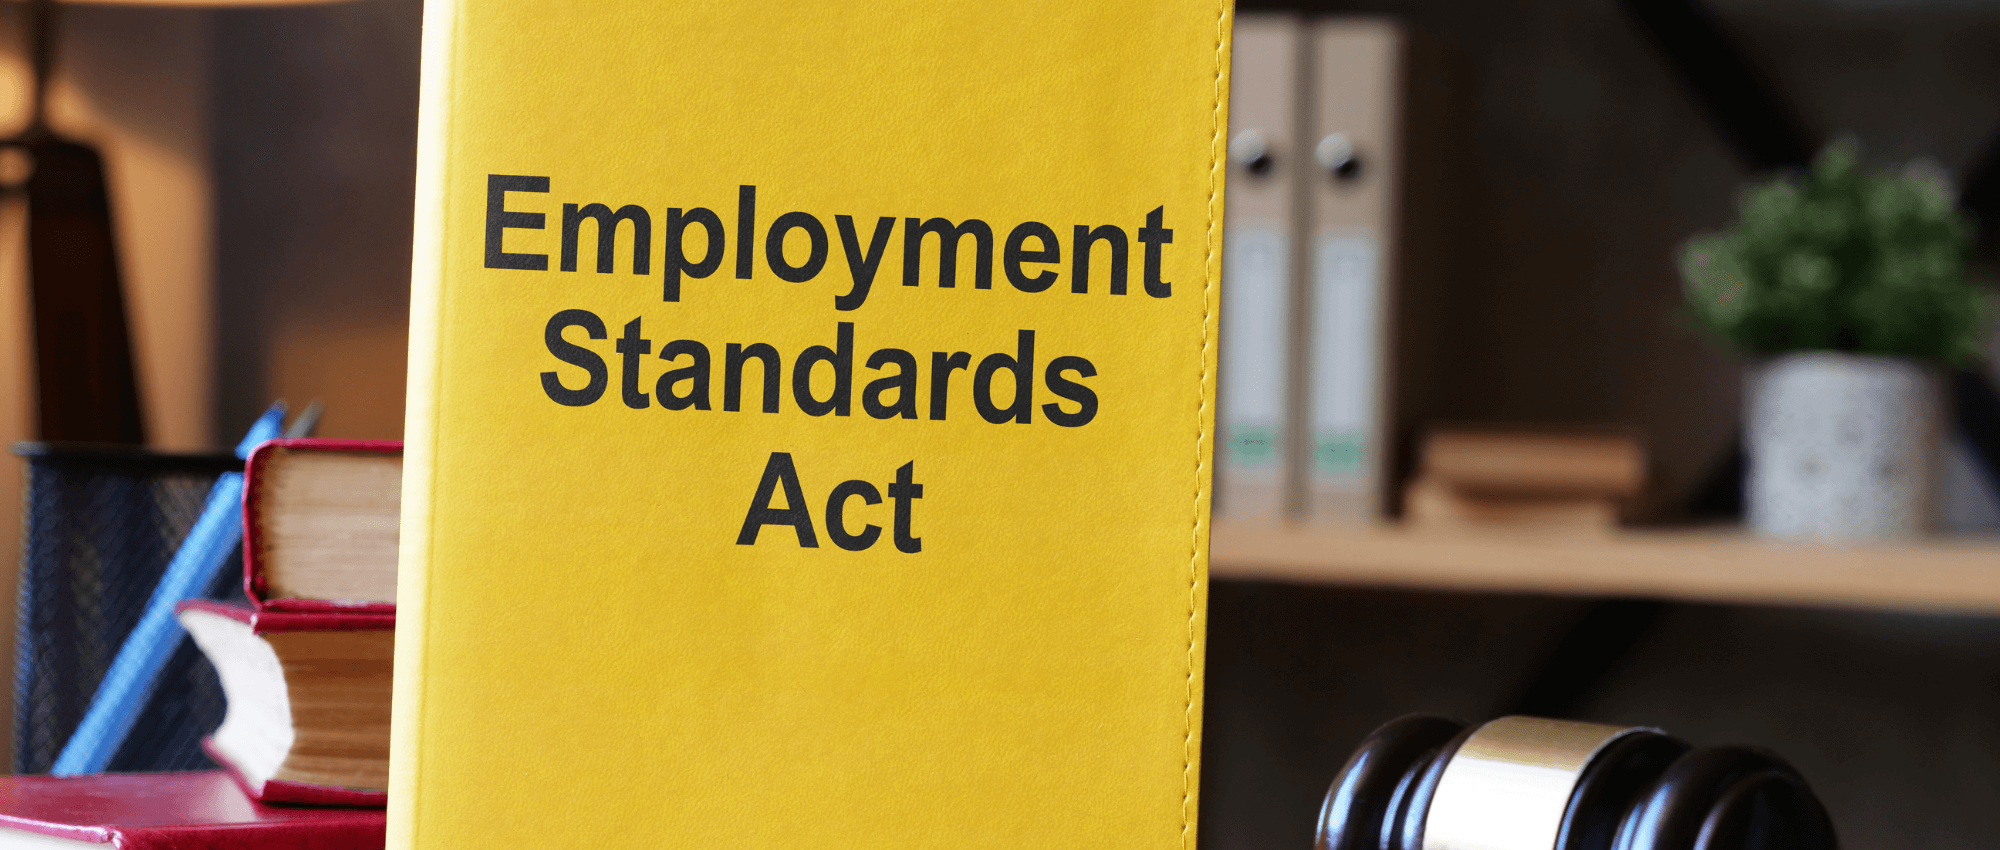 employment standards act on a desk with gavel